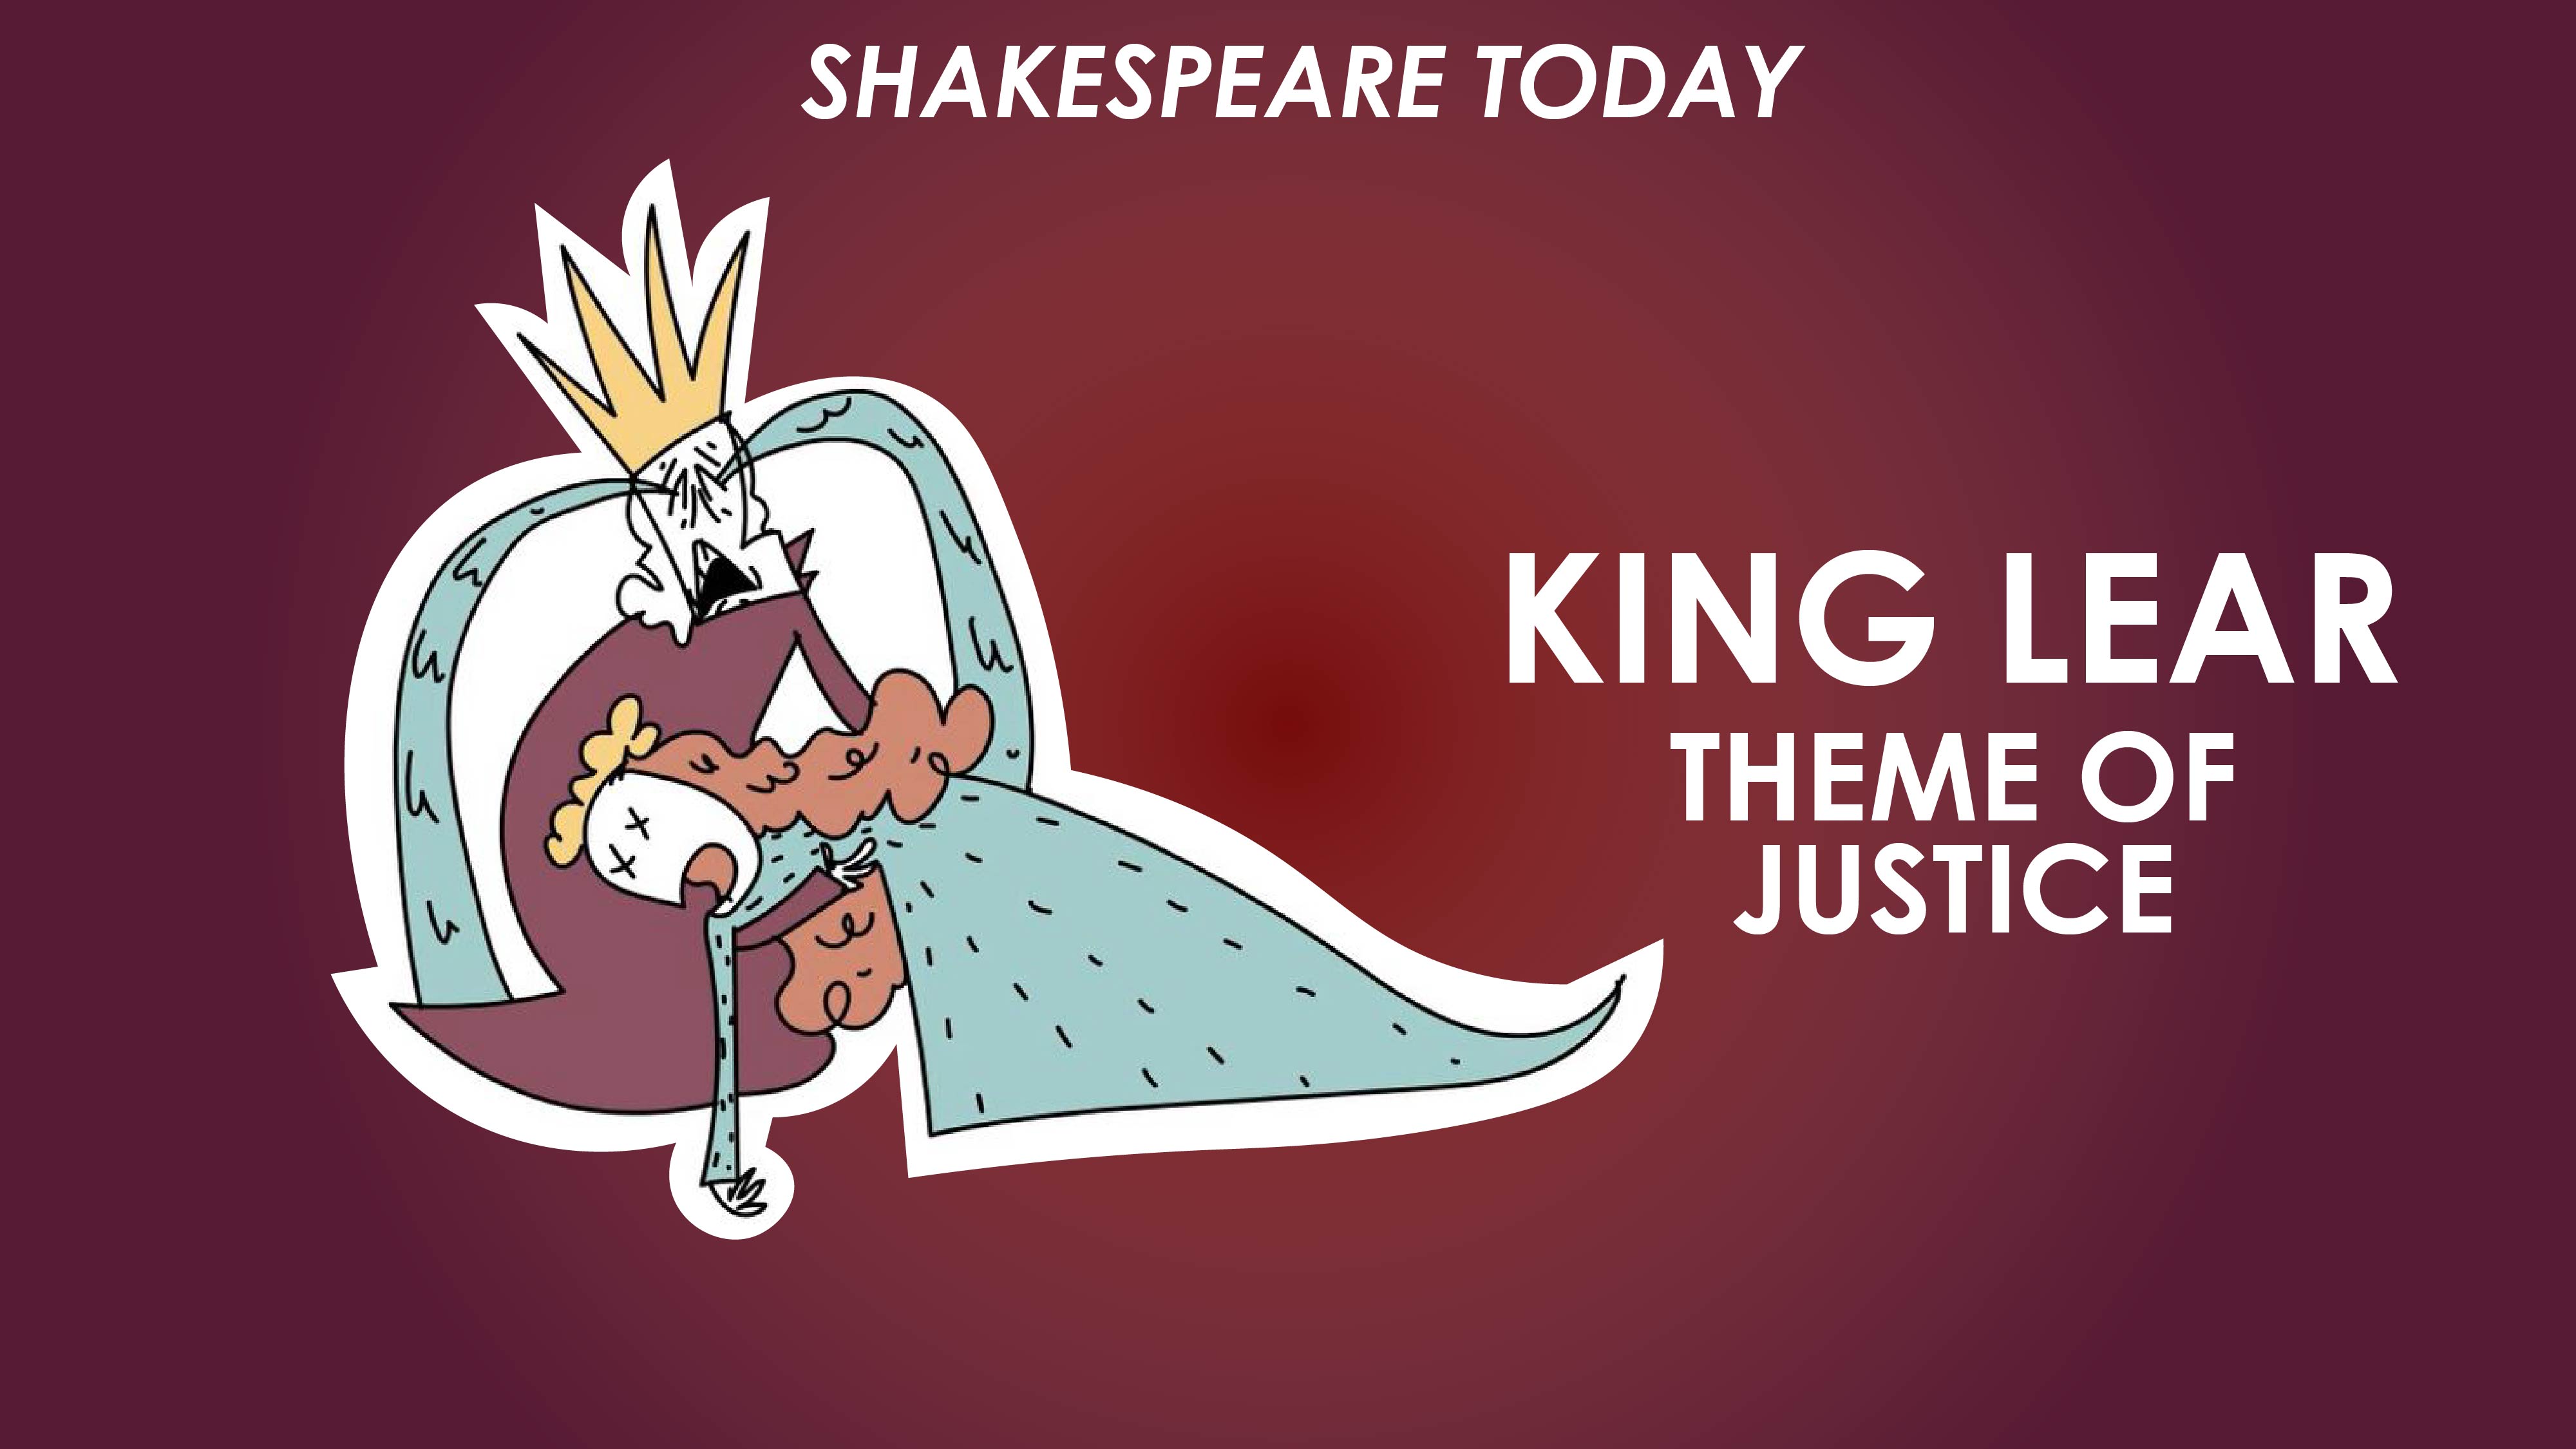 King Lear Theme of Justice